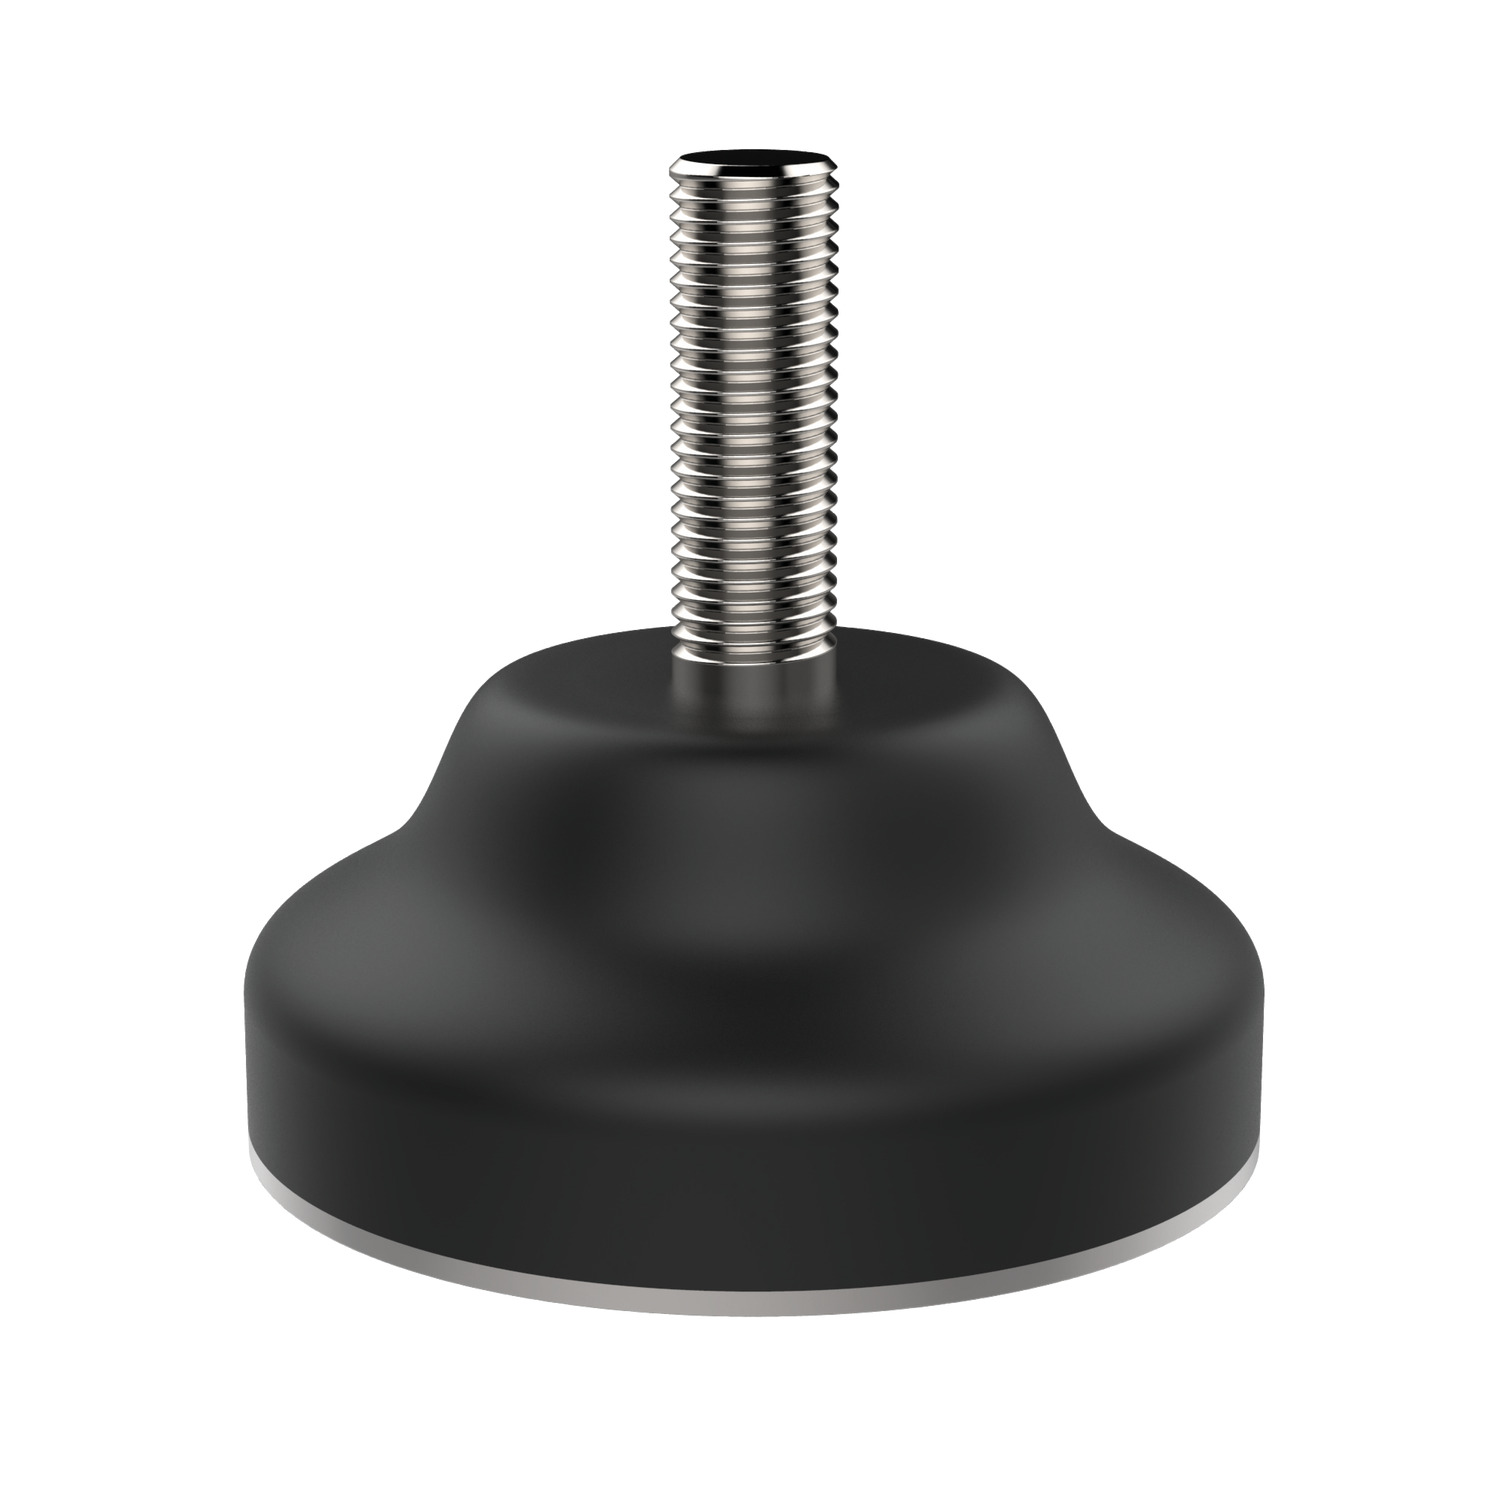 Product 34611, Fixed Feet steel with hex socket / 